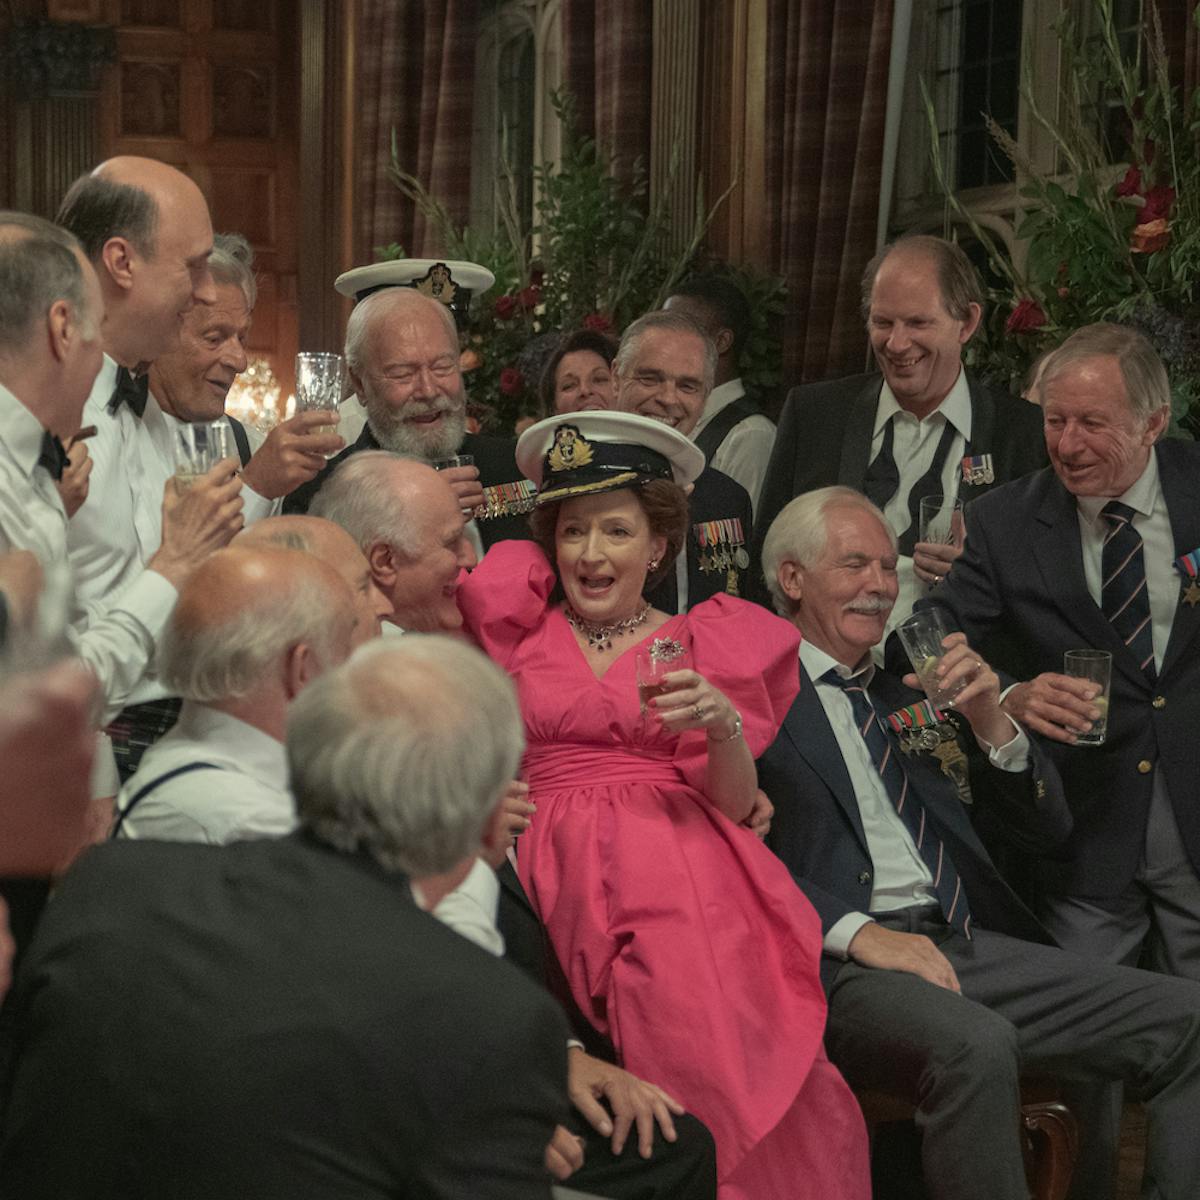 Princess Margaret (Lesley Manville) wears a fantastic pink dress and flirts with a crowd of men in suits.